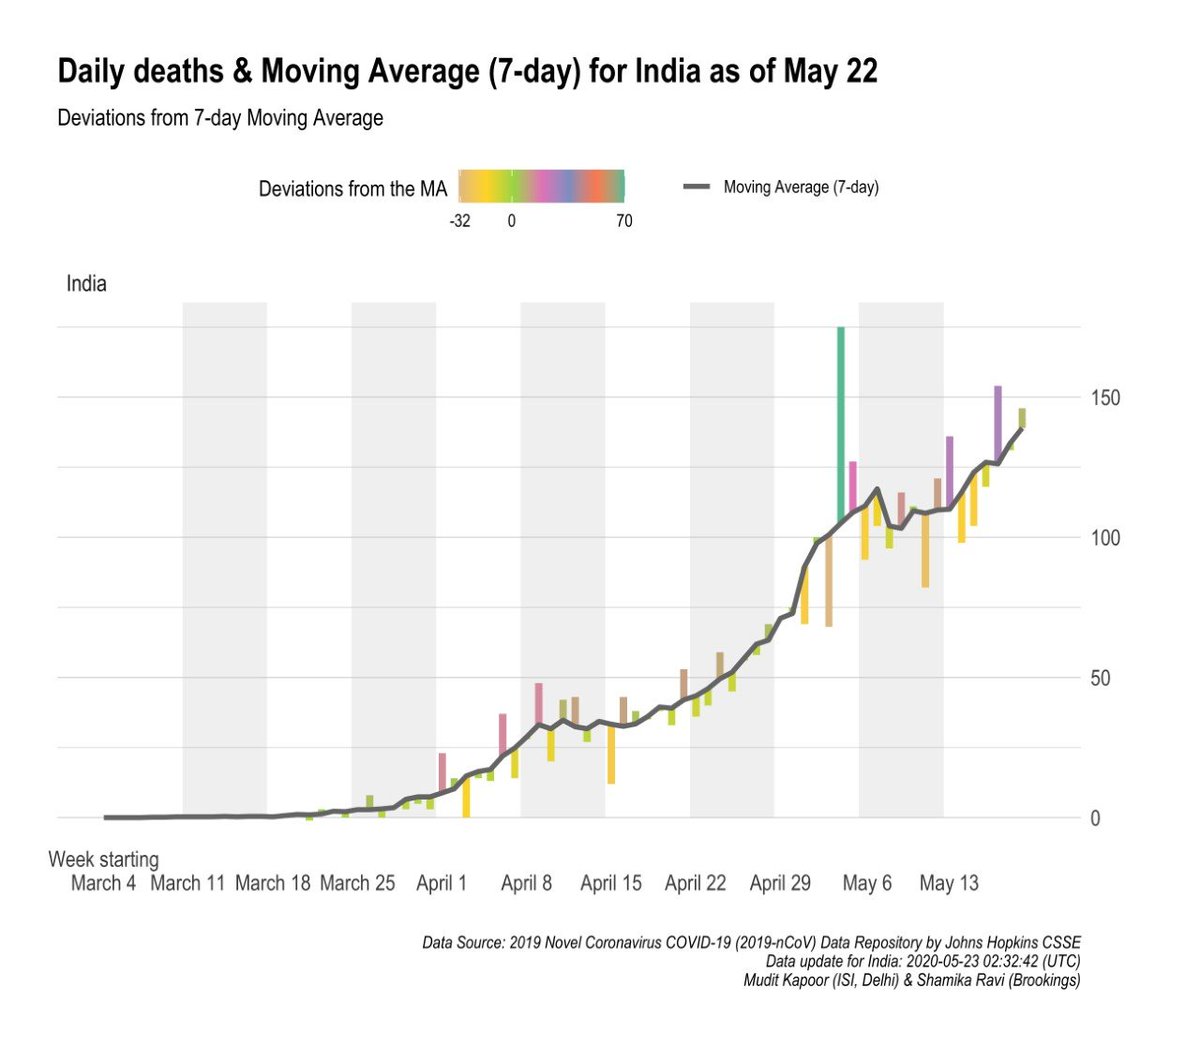 7 Day Moving Average:1) Daily cases2) Daily deaths